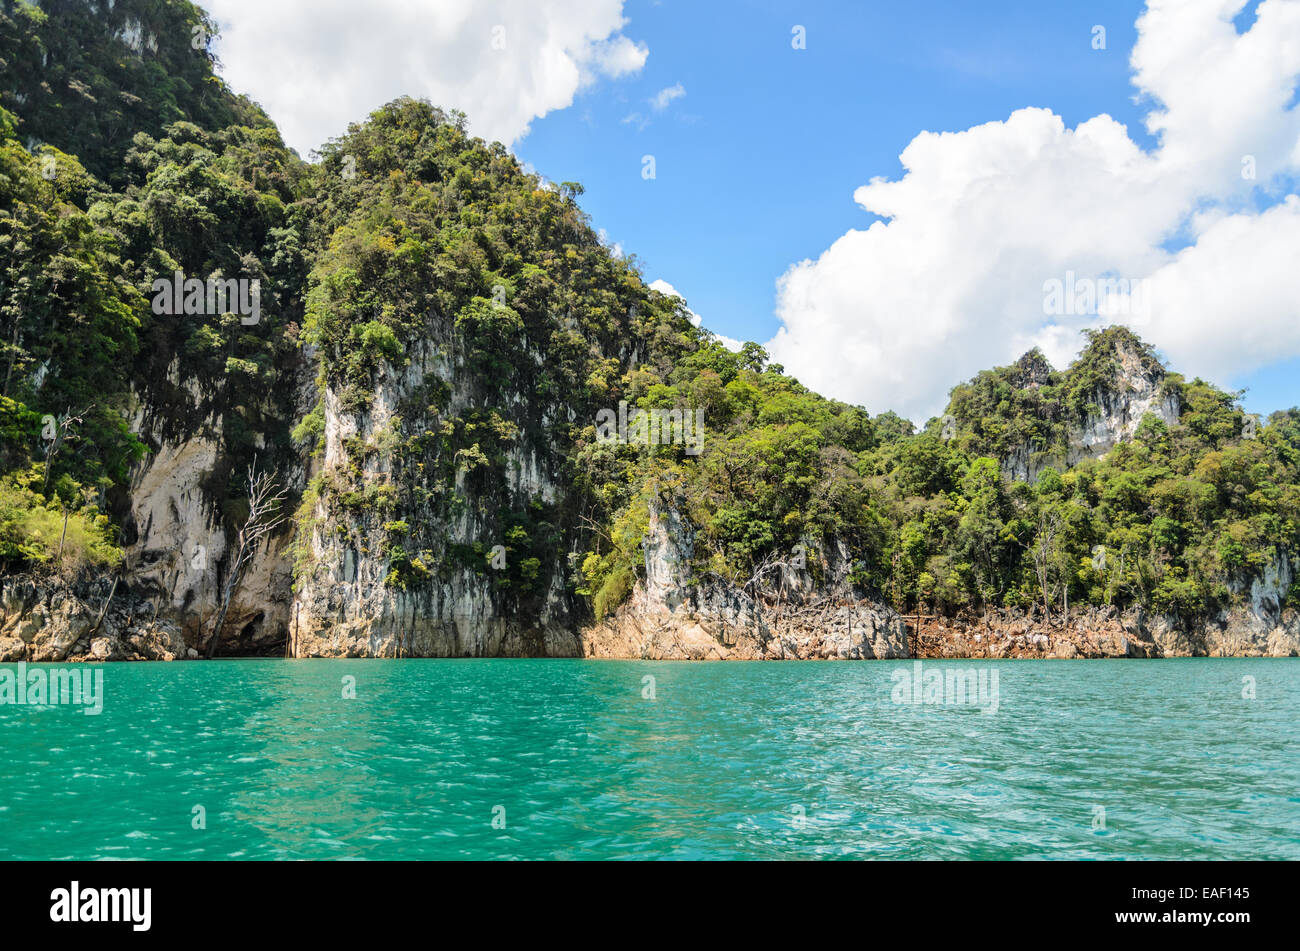 Beautiful island surrounded by water, Natural attractions at Ratchapapha dam in Khao Sok National Park, Surat Thani province, Gu Stock Photo